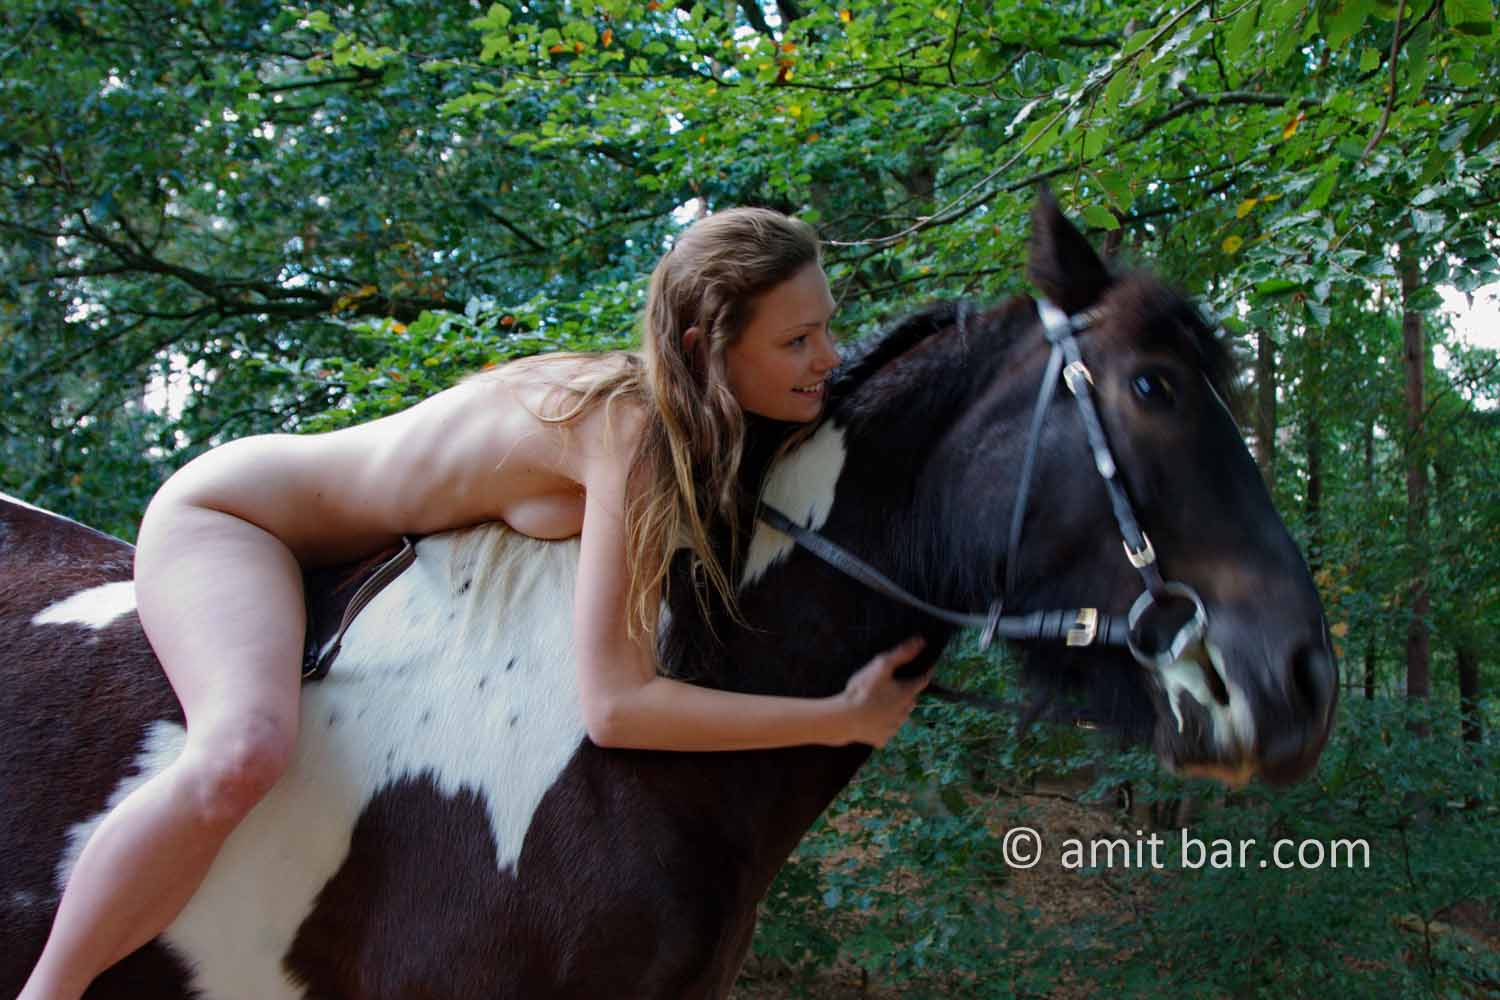 Cool down, boy!: Nude model on the back of a black and white horse